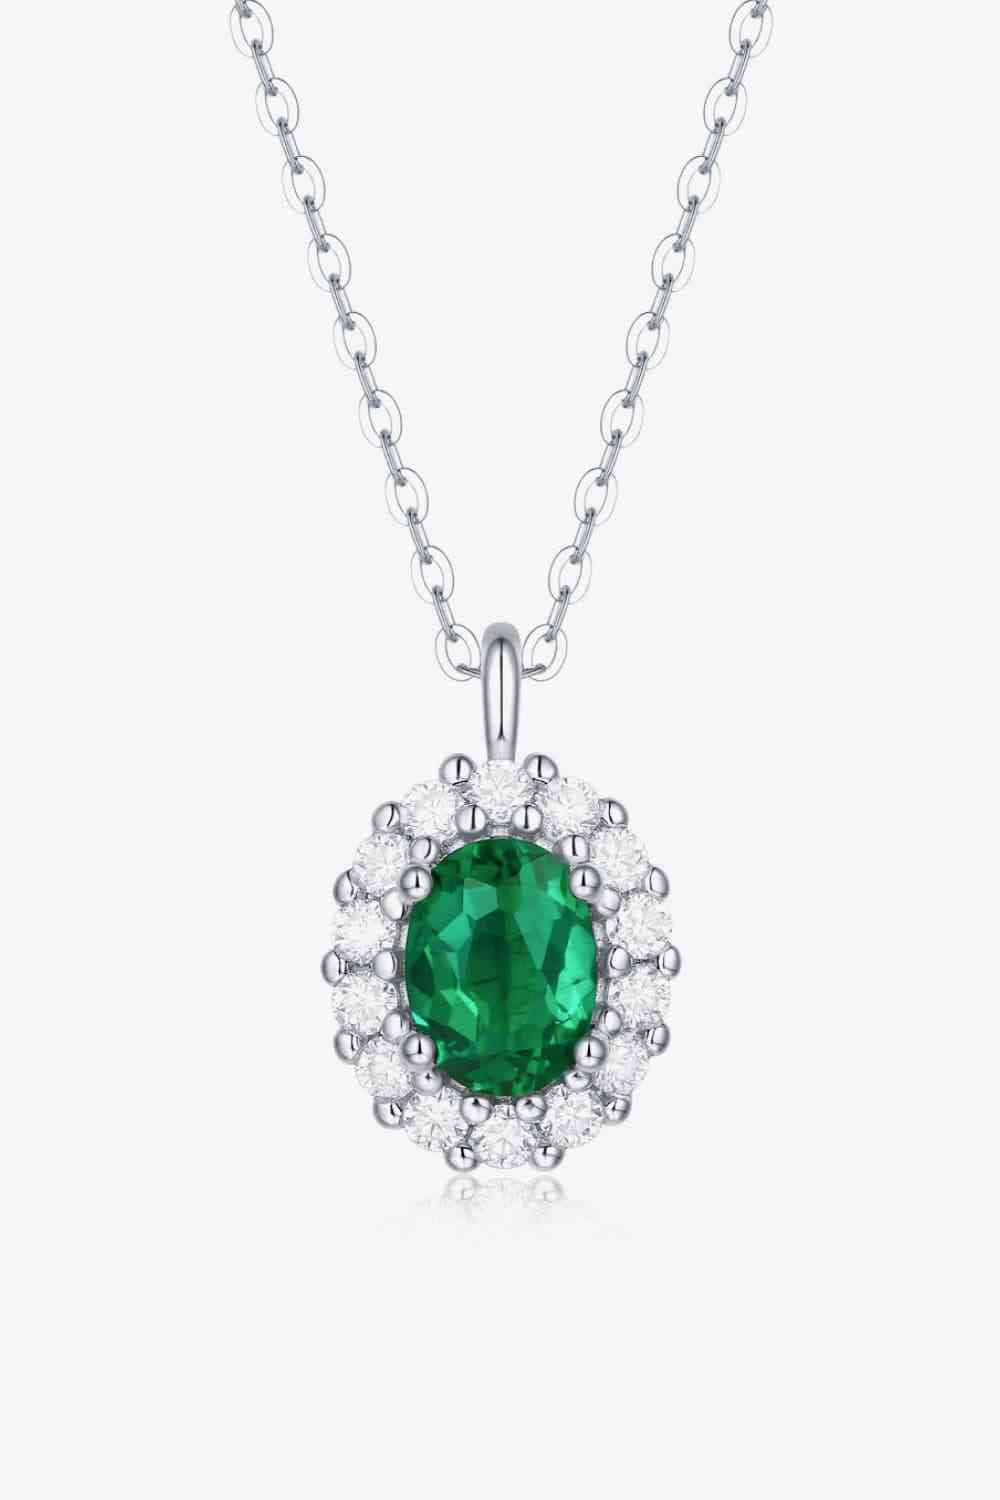 1.5 Carat Emerald 925 Sterling Silver Necklace